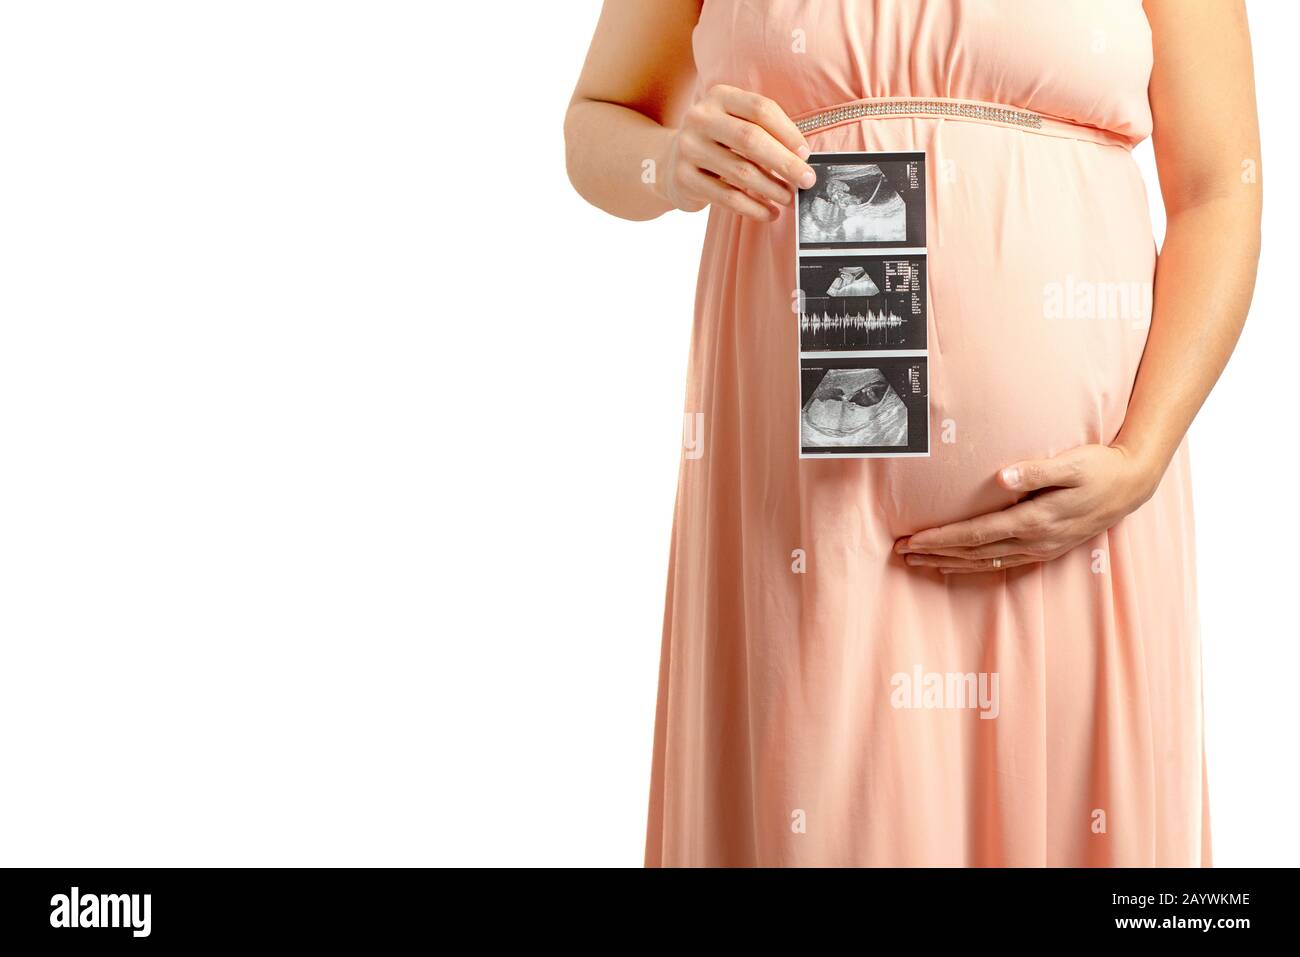 pregnant women holding props with baby ultrasound image on it . Indoor maternity shoot with props on white background. Stock Photo